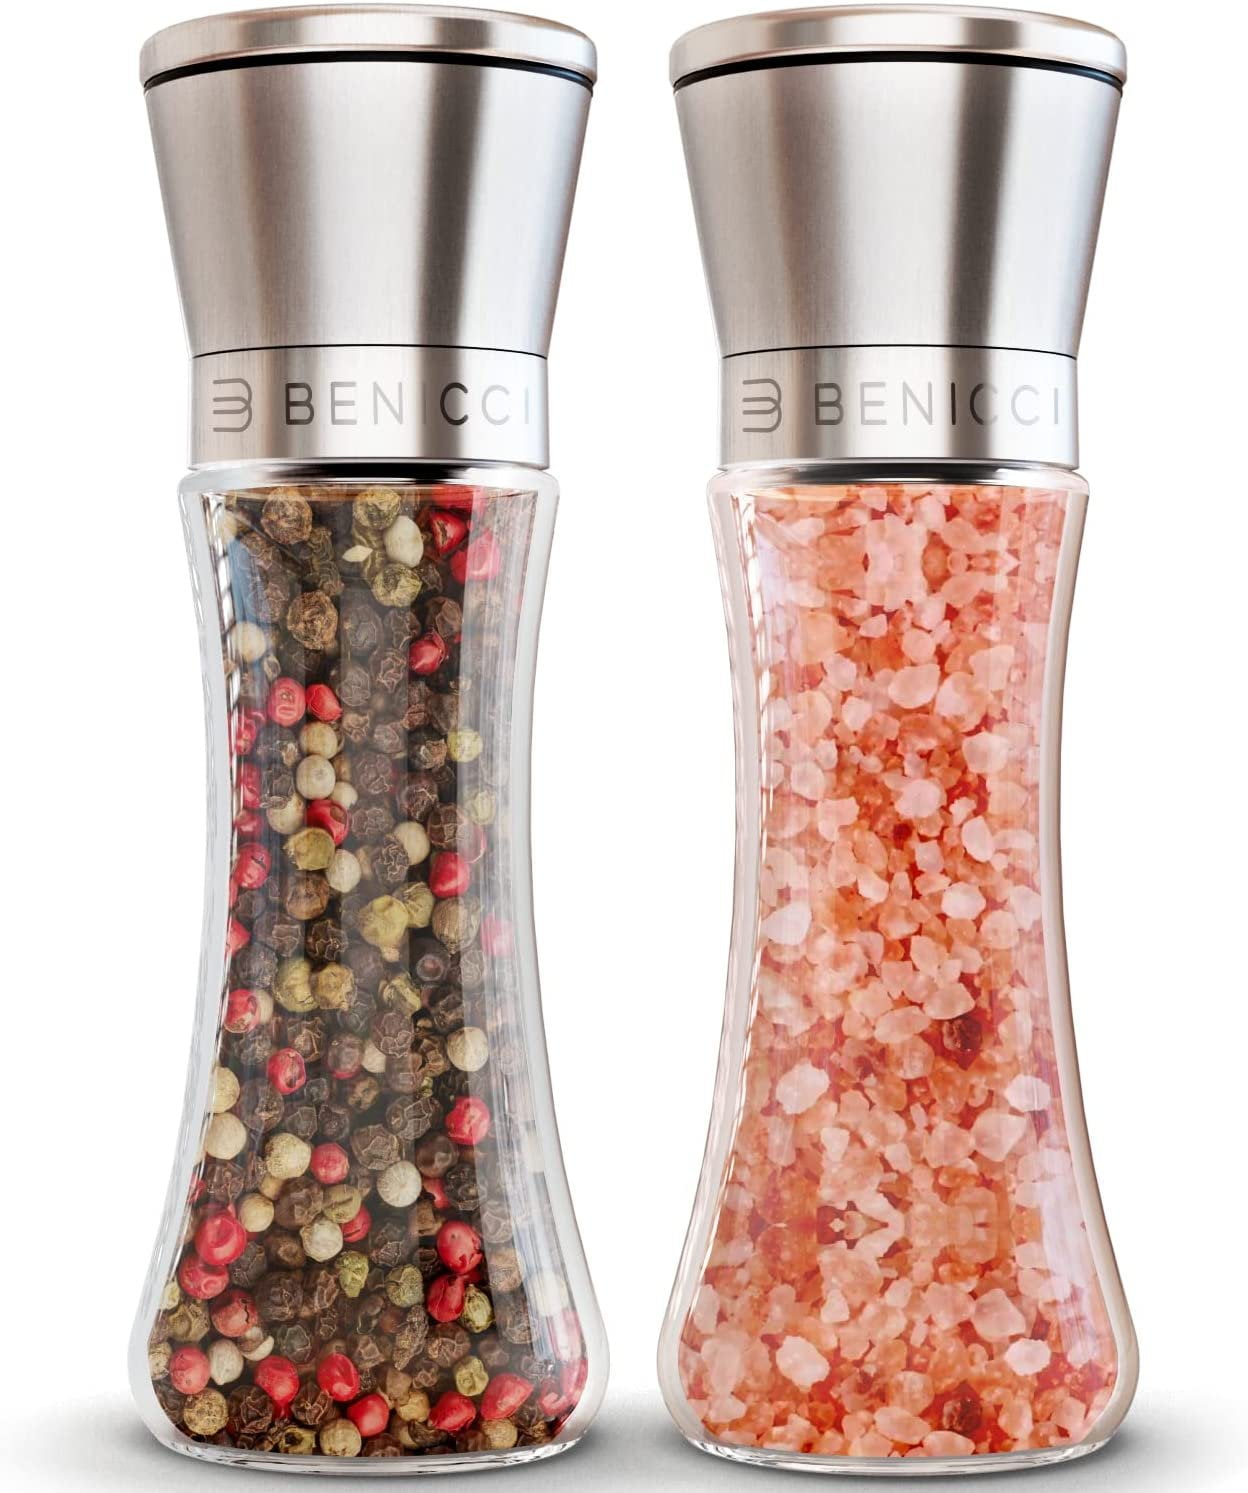 Vucchini Adjustable Salt and Pepper Grinder Shaker Set of 4 - Salt and Pepper  Mill Shakers Set with Adjustable Pour Holes - Refillable Stainless Steel Himalayan  Pink Salt and Pepper Mills - Yahoo Shopping